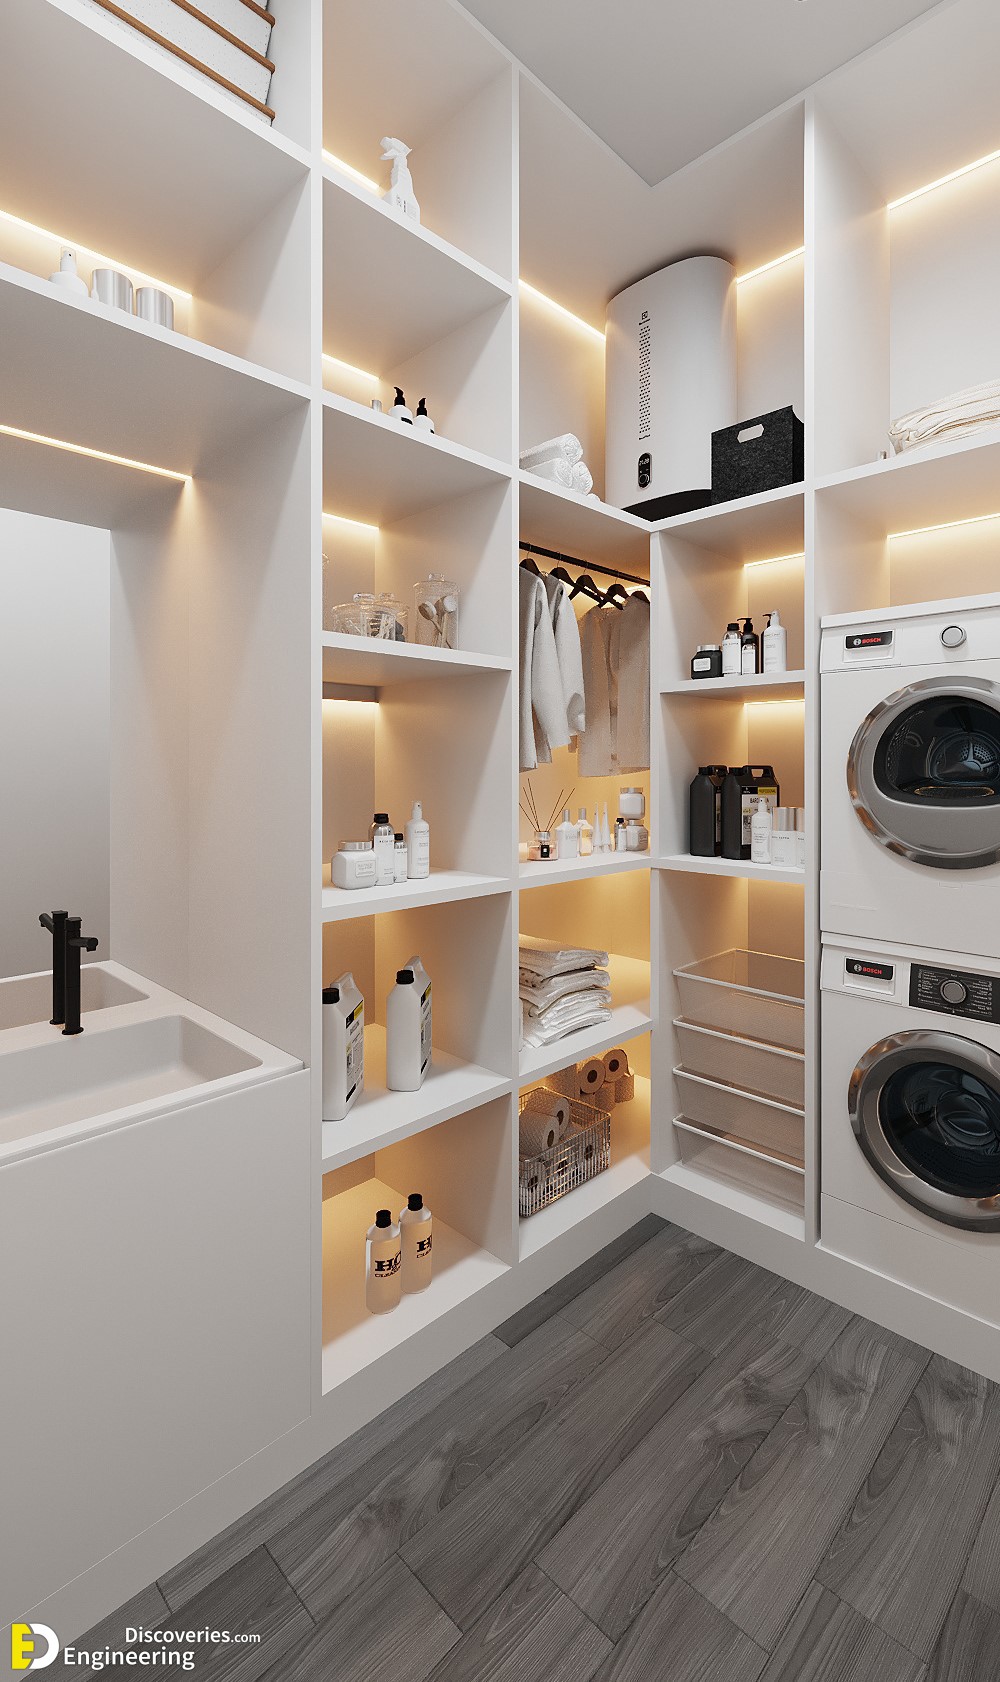 https://engineeringdiscoveries.com/wp-content/uploads/2023/12/5-engineering-discoveries-36-small-laundry-room-ideas-that-maximize-space-and-style.jpg